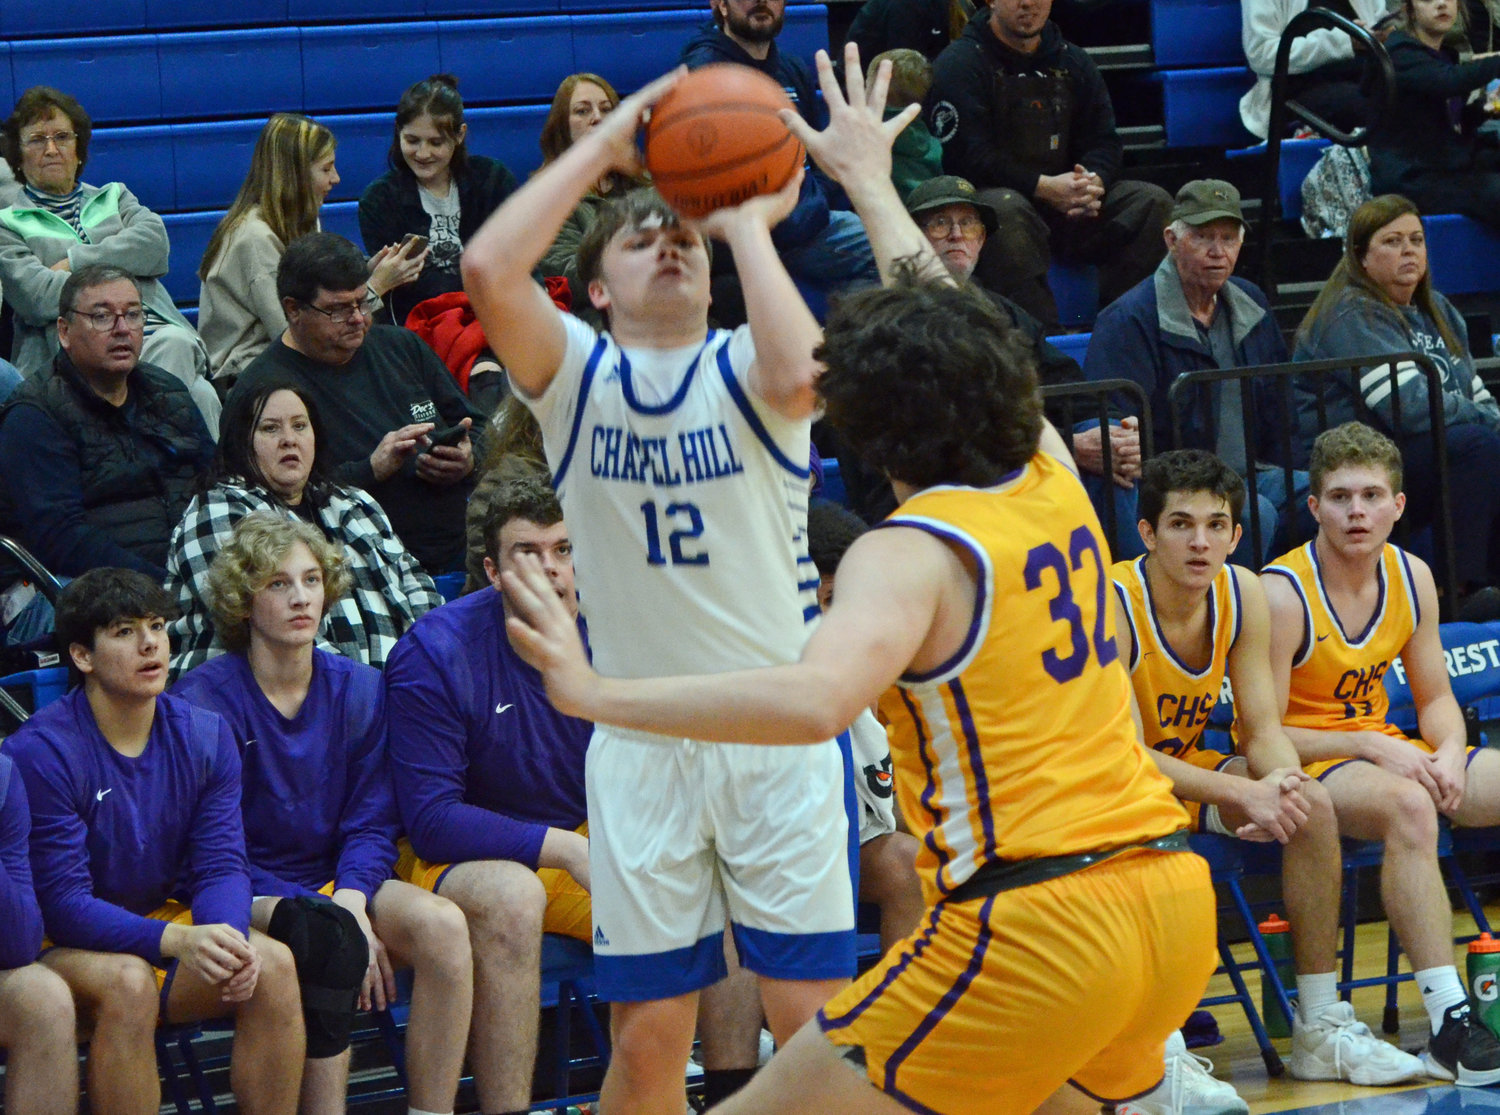 Forrest’s Brennan Mealer (12) nails one of his four 3-pointers in the game for the Rockets, who fell 56-44 to the Community Vikings in Friday night’s District 7-AA opener at Chapel Hill.